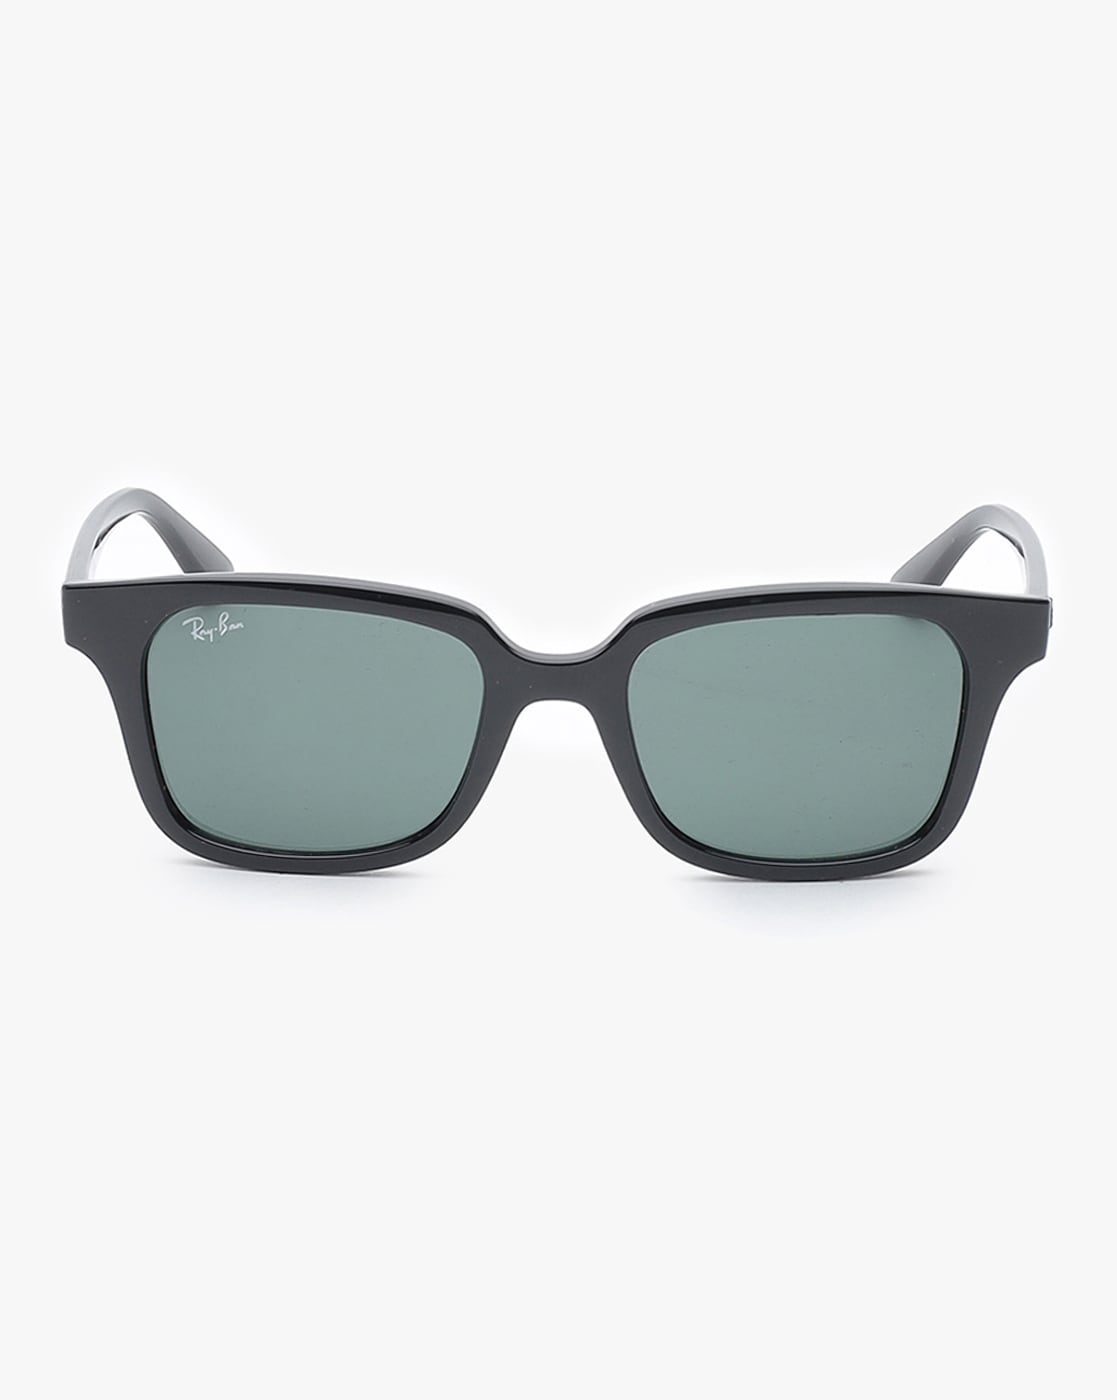 Buy Black Sunglasses for Boys by Ray Ban Online 